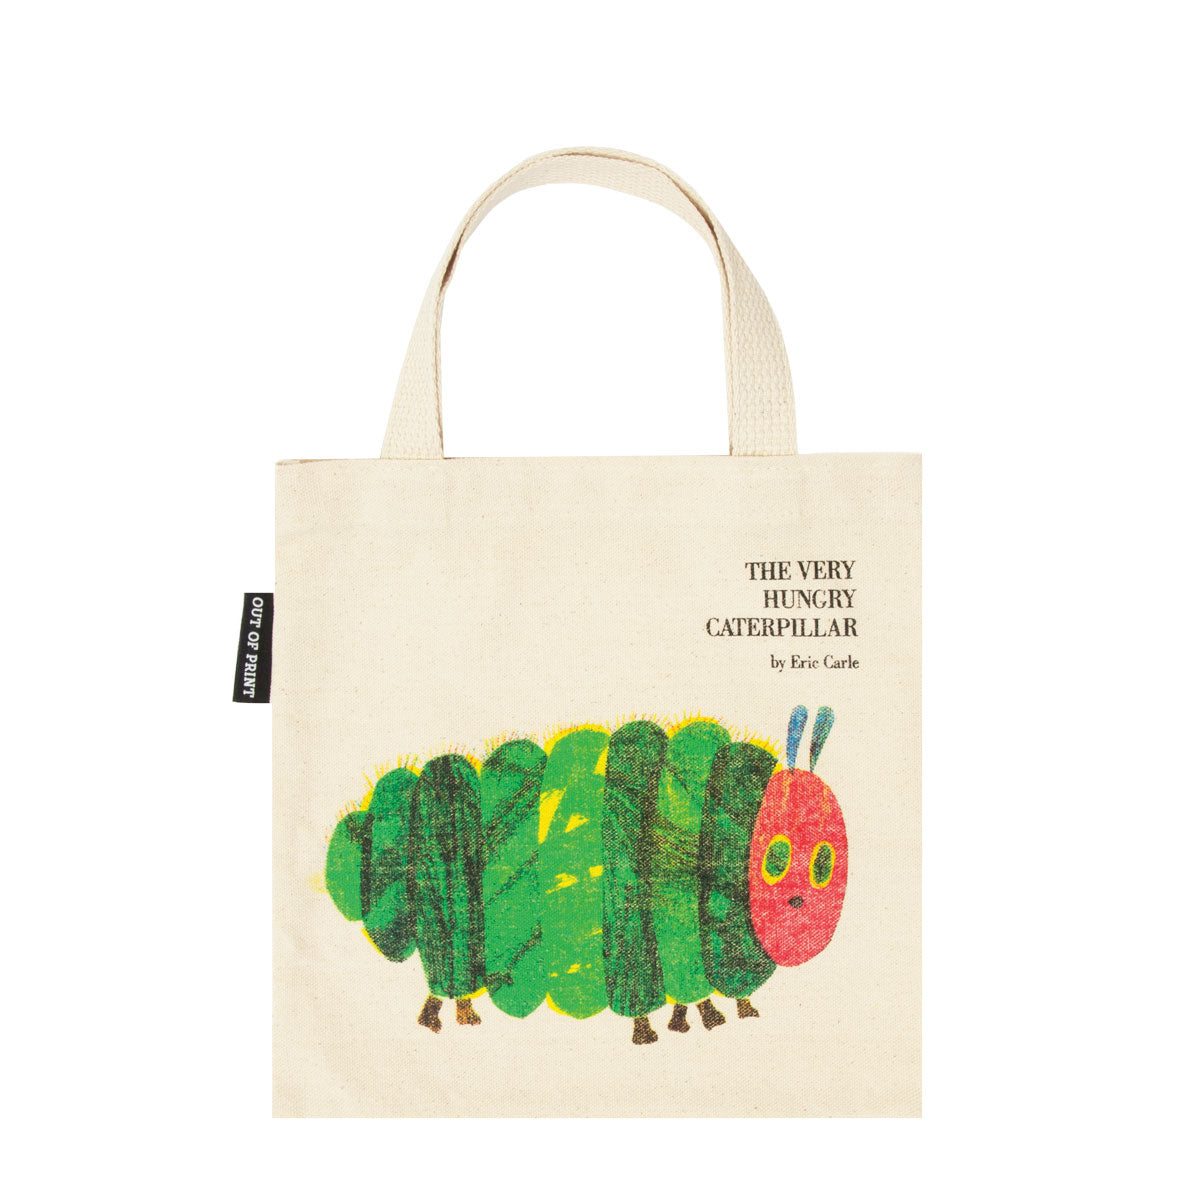 World of Eric Carle The Very Hungry Caterpillar mini tote bag — Out